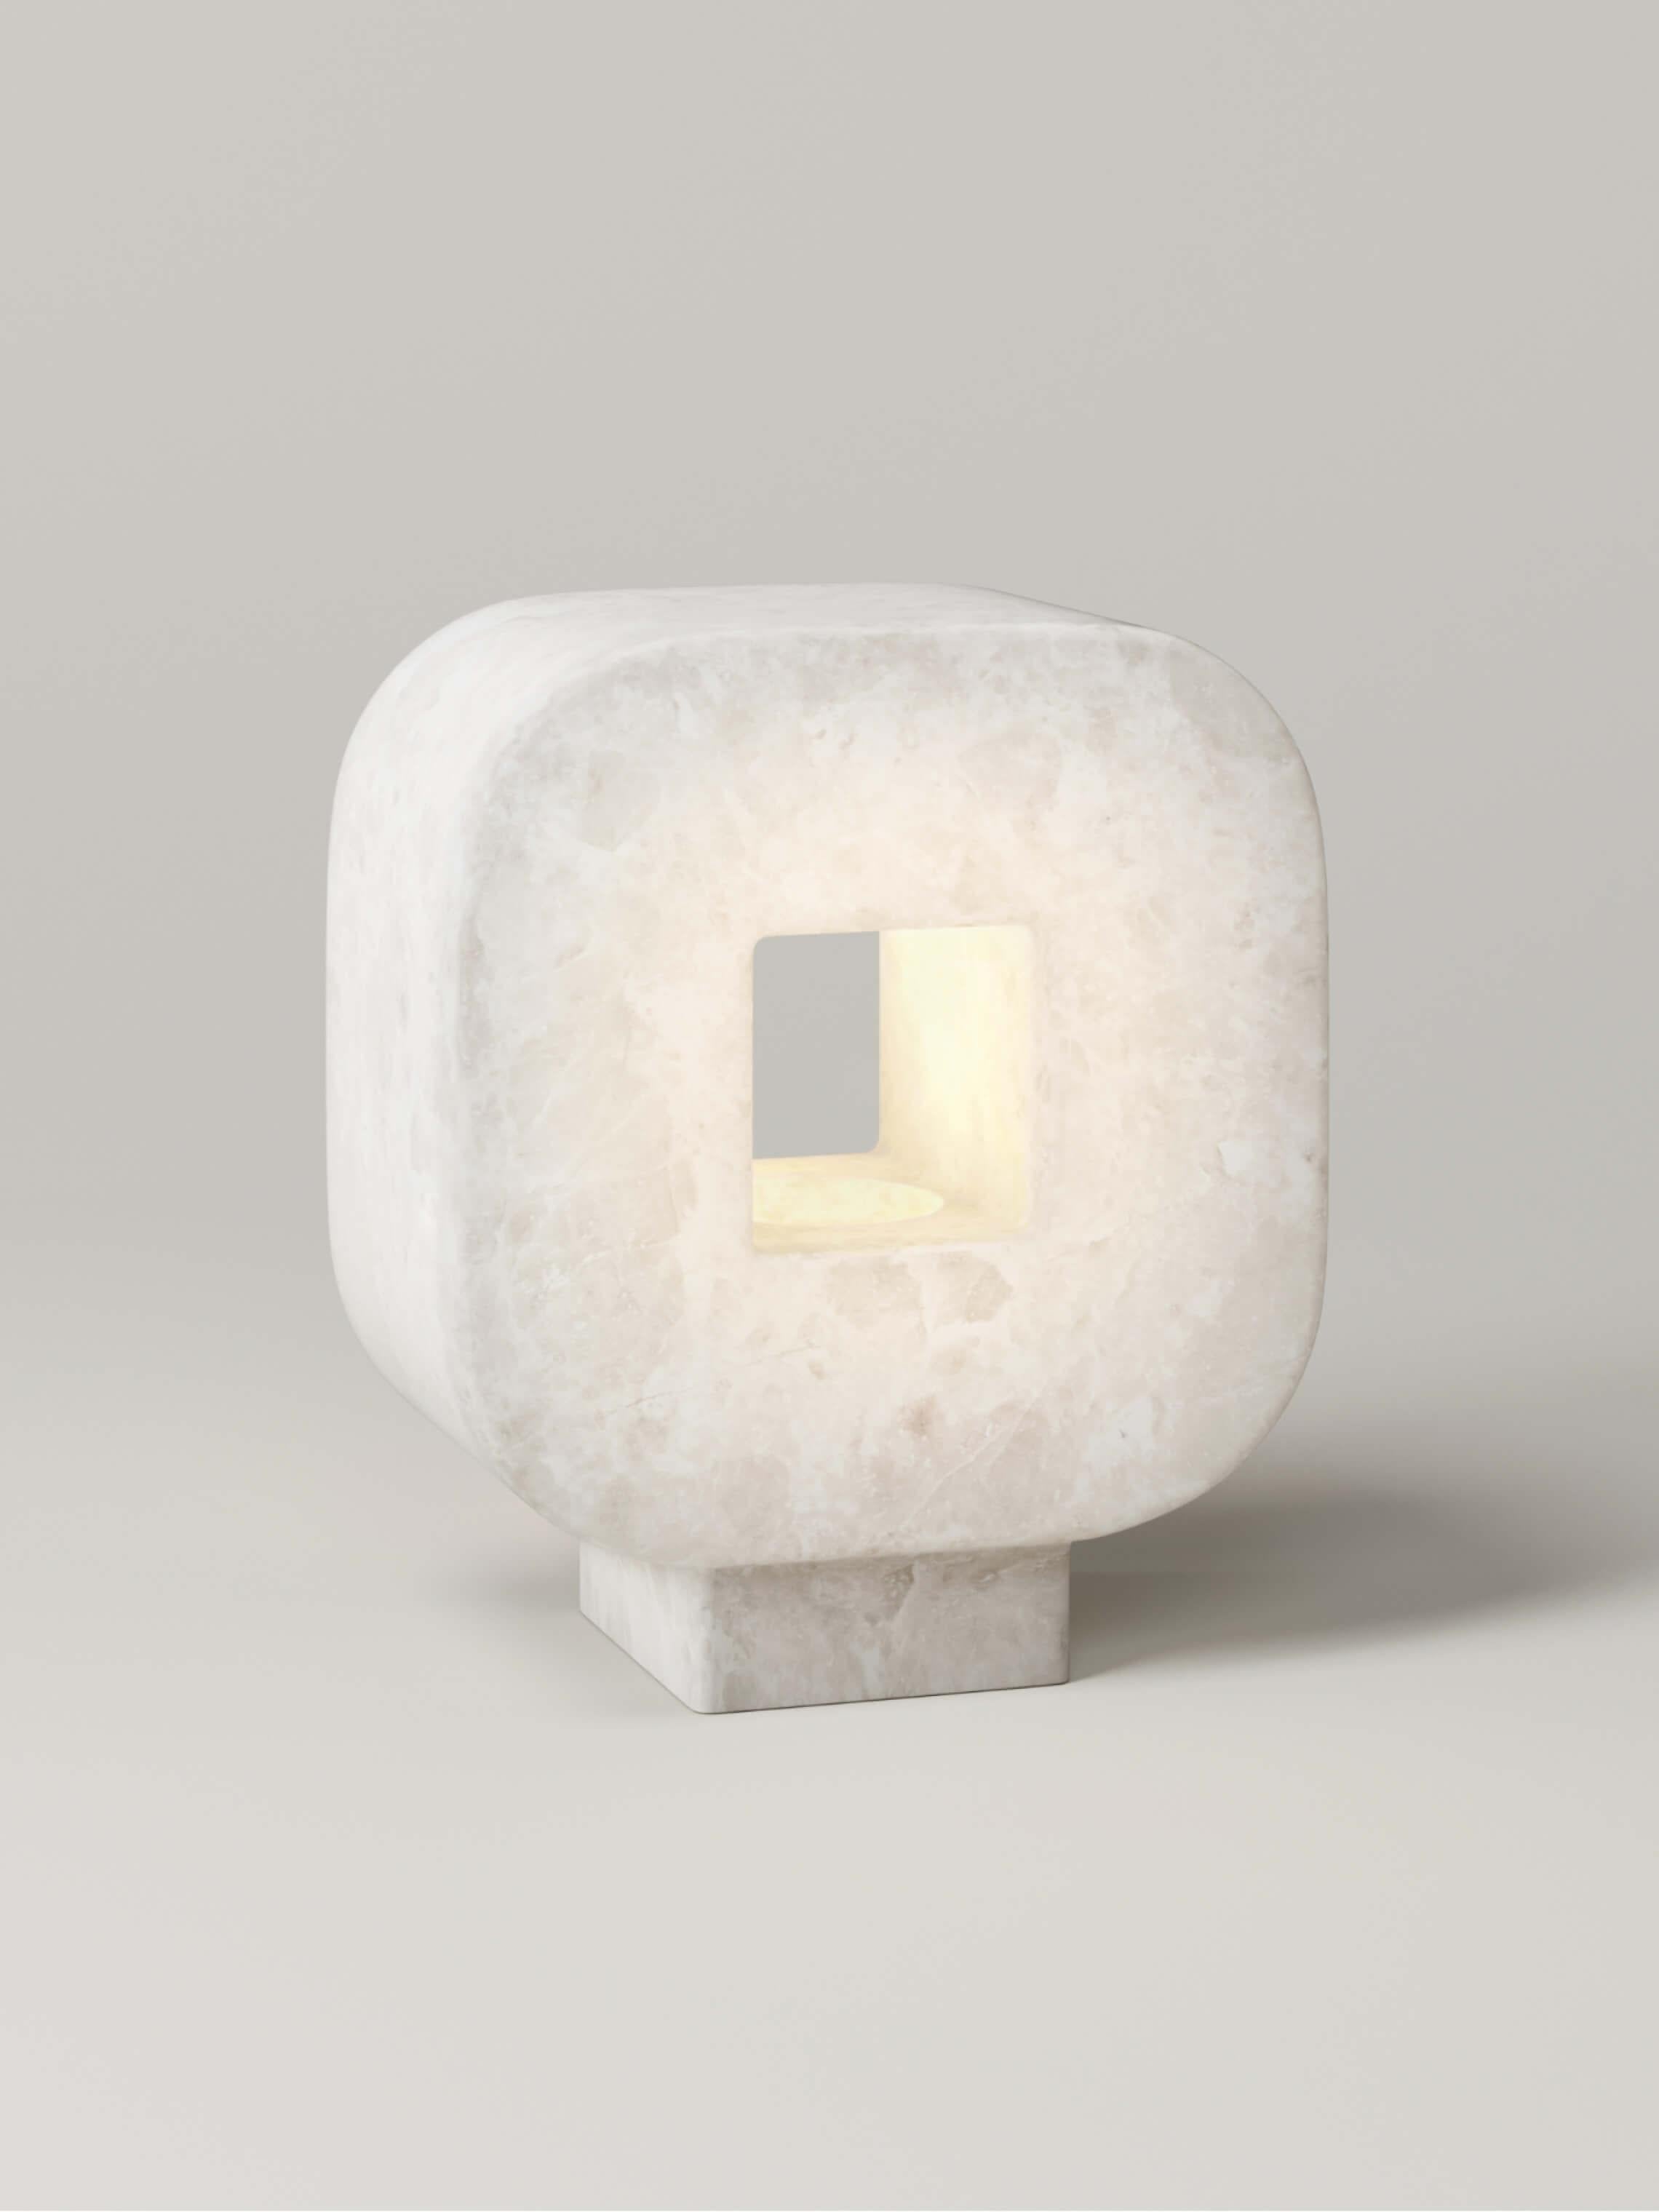 M_004 Onyx Table Lamp by Monolith Studio
Signed and Numbered.
Dimensions: D 20 x W 37 x H 42 cm.
Materials: Onyx. 

Available in travertine, onyx and lava rock. All our lamps can be wired according to each country. If sold to the USA it will be